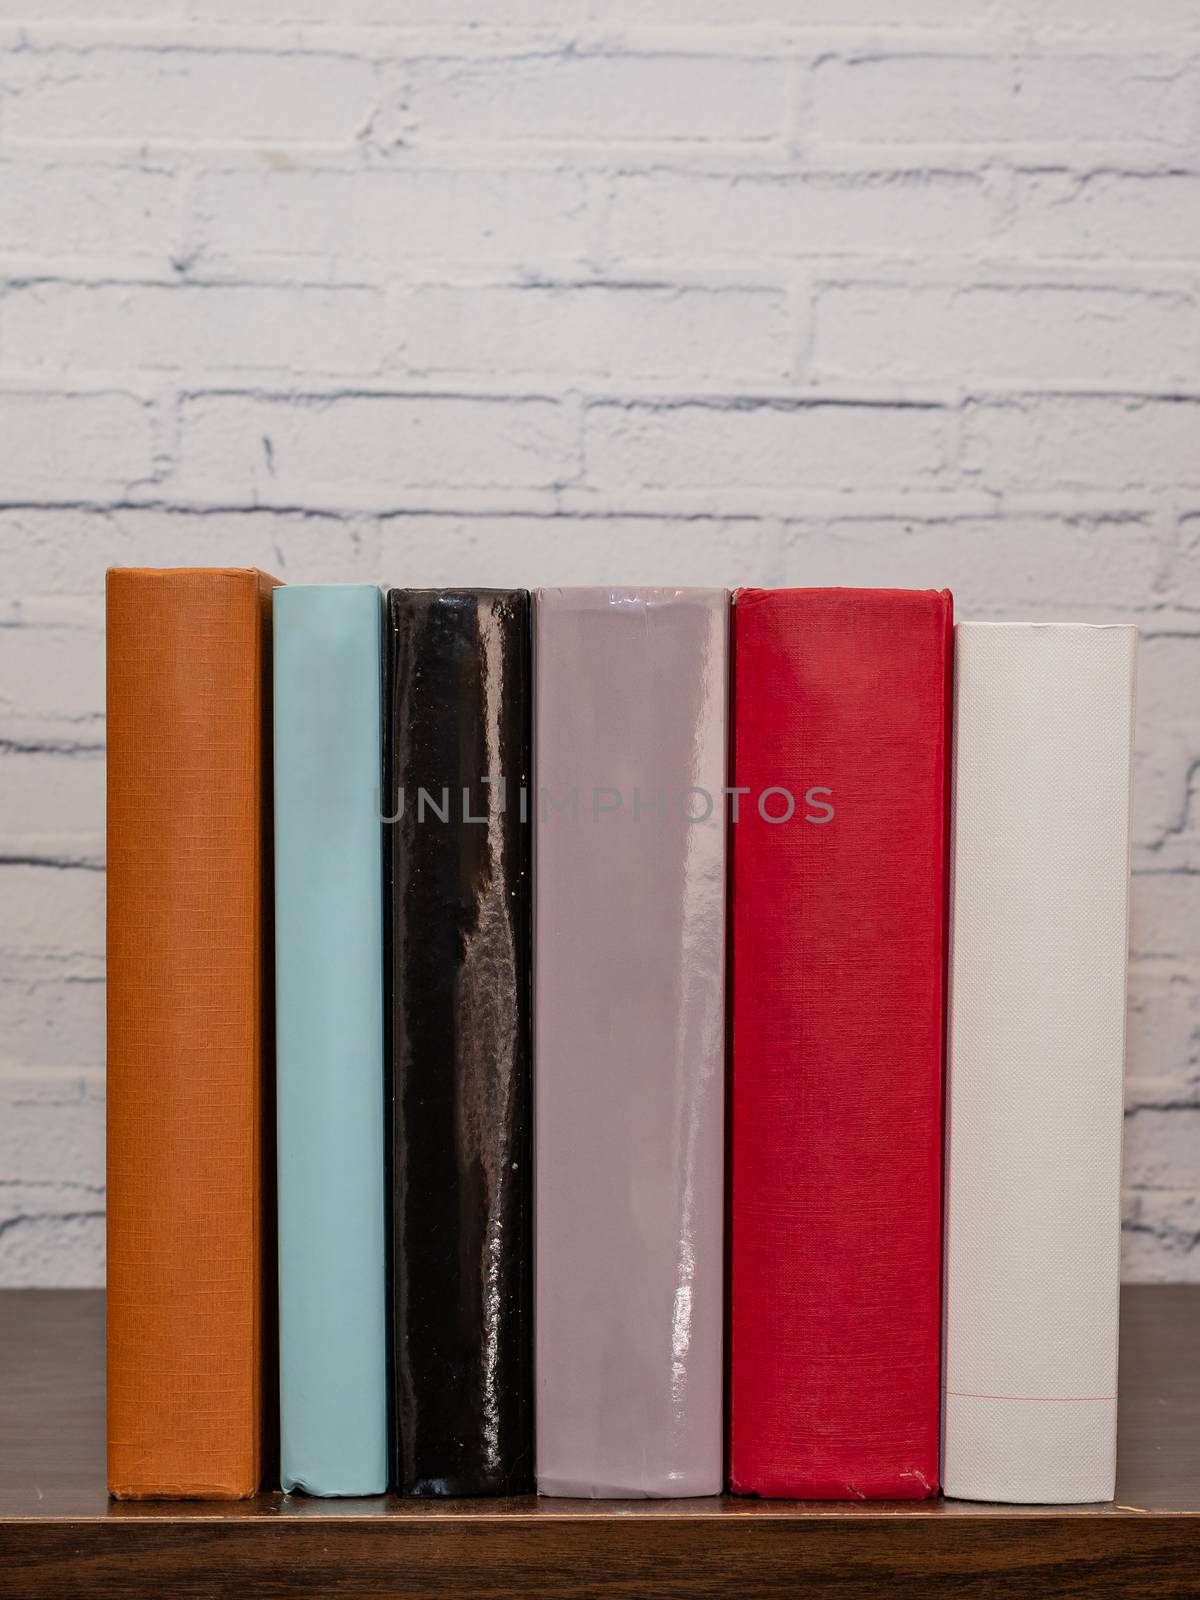 Six books of different colors resting on a dark wooden shelf, in the background a white painted brick wall